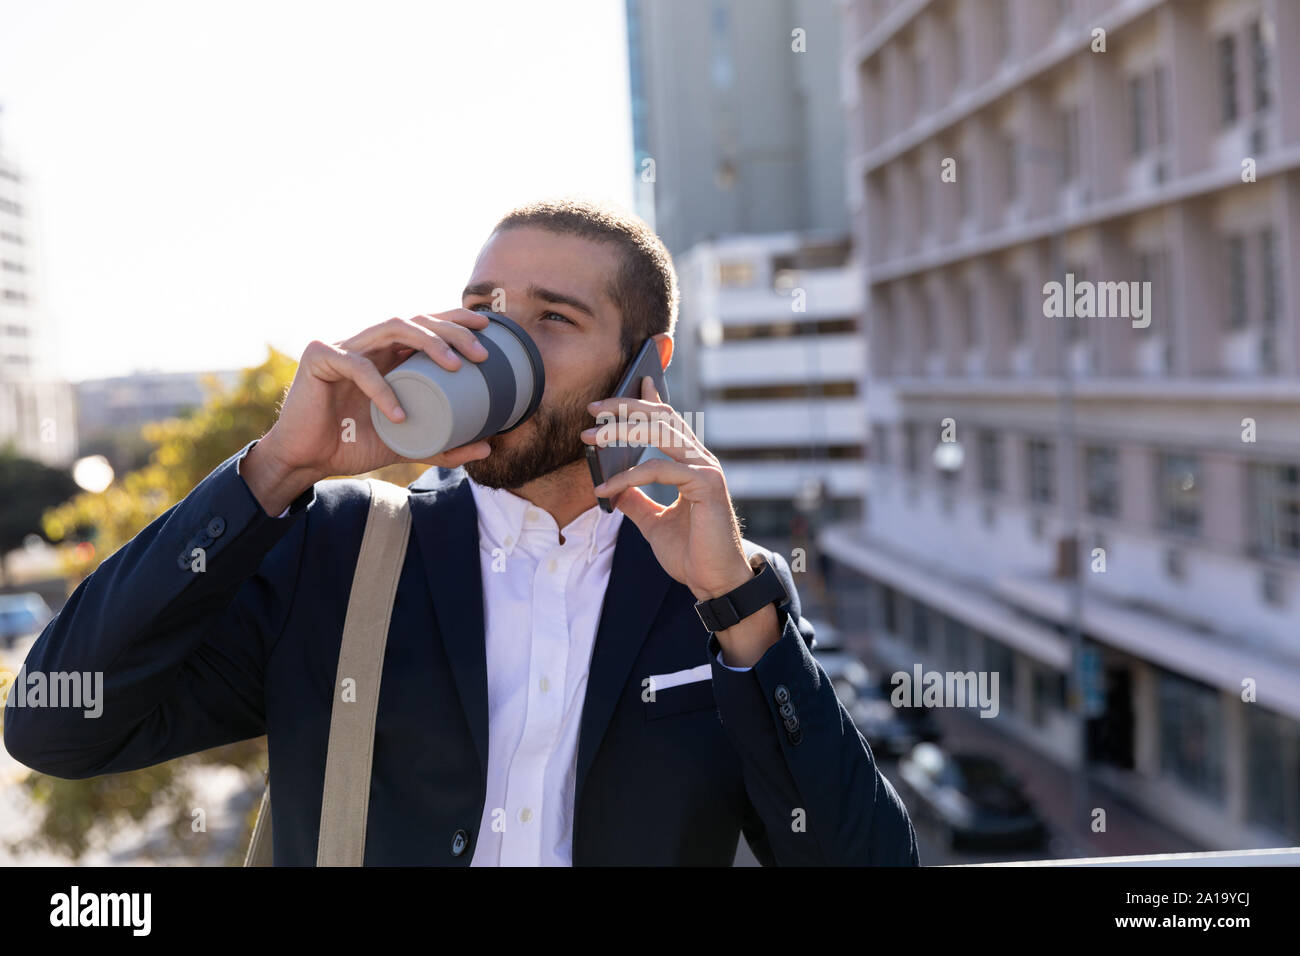 Young professional man on the phone in the city Stock Photo